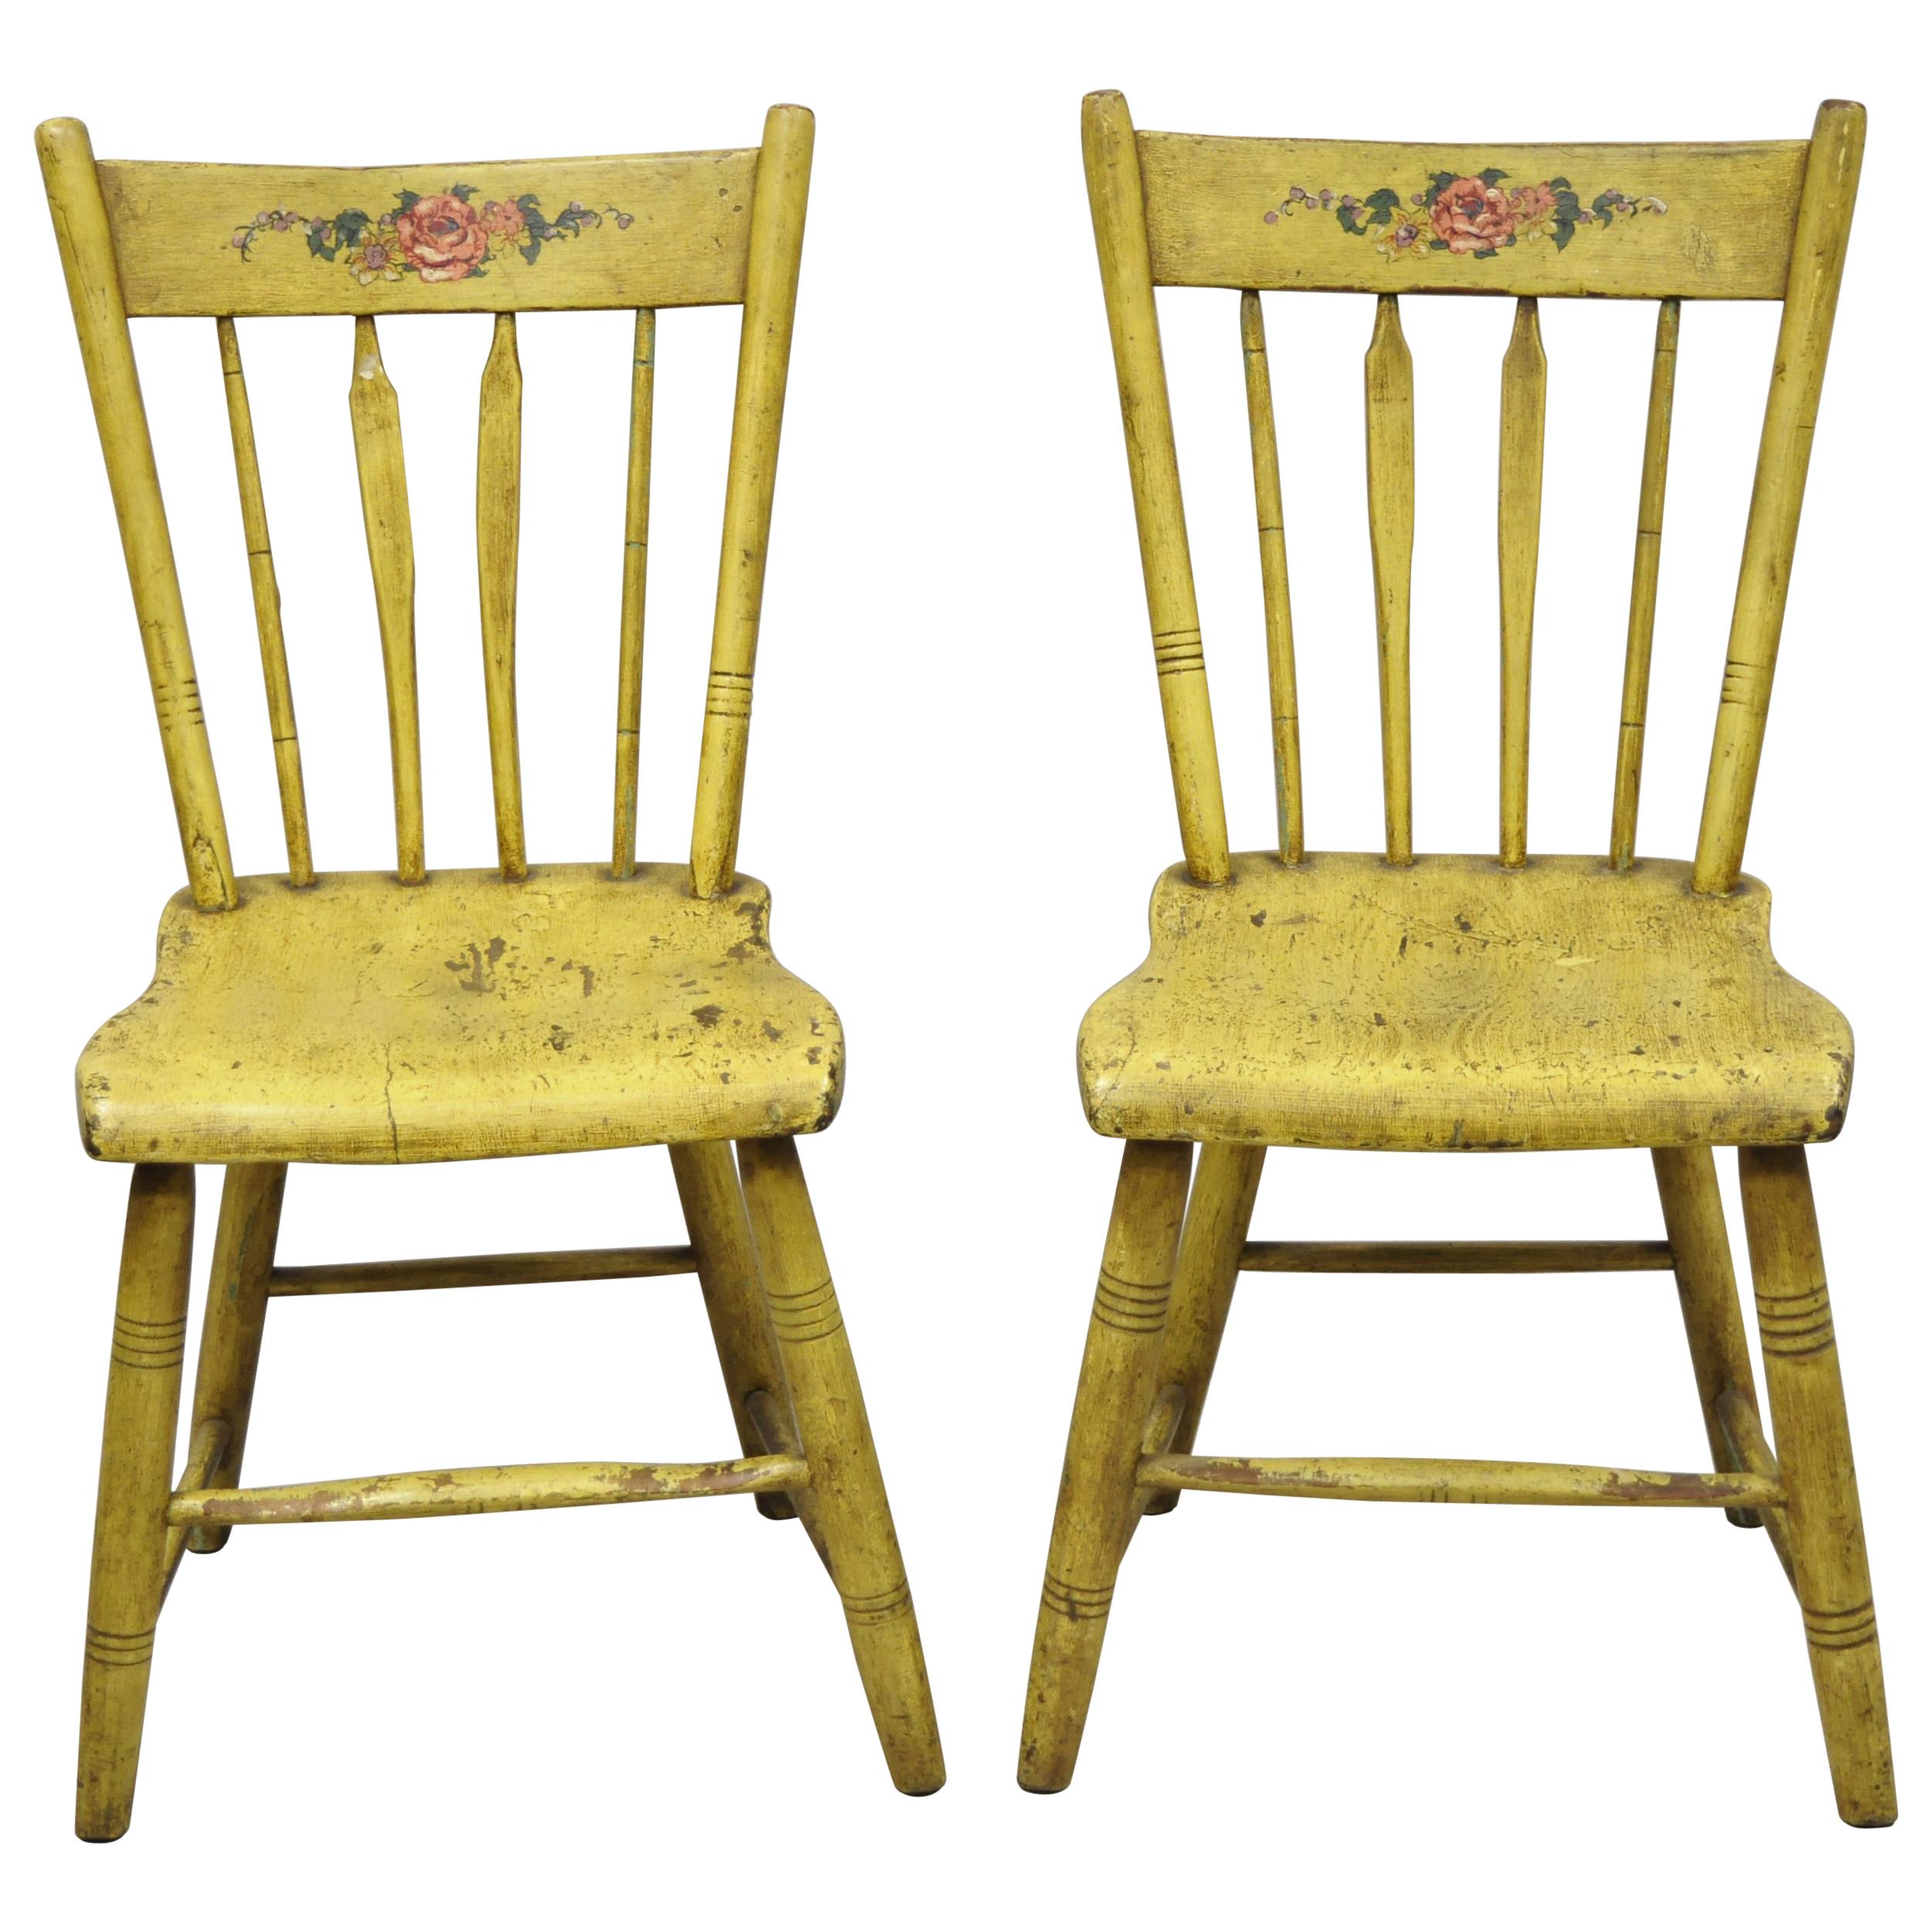 Frederick Loeser & Co Yellow Primitive Hitchcock Style Side Chairs, Pair 'A'